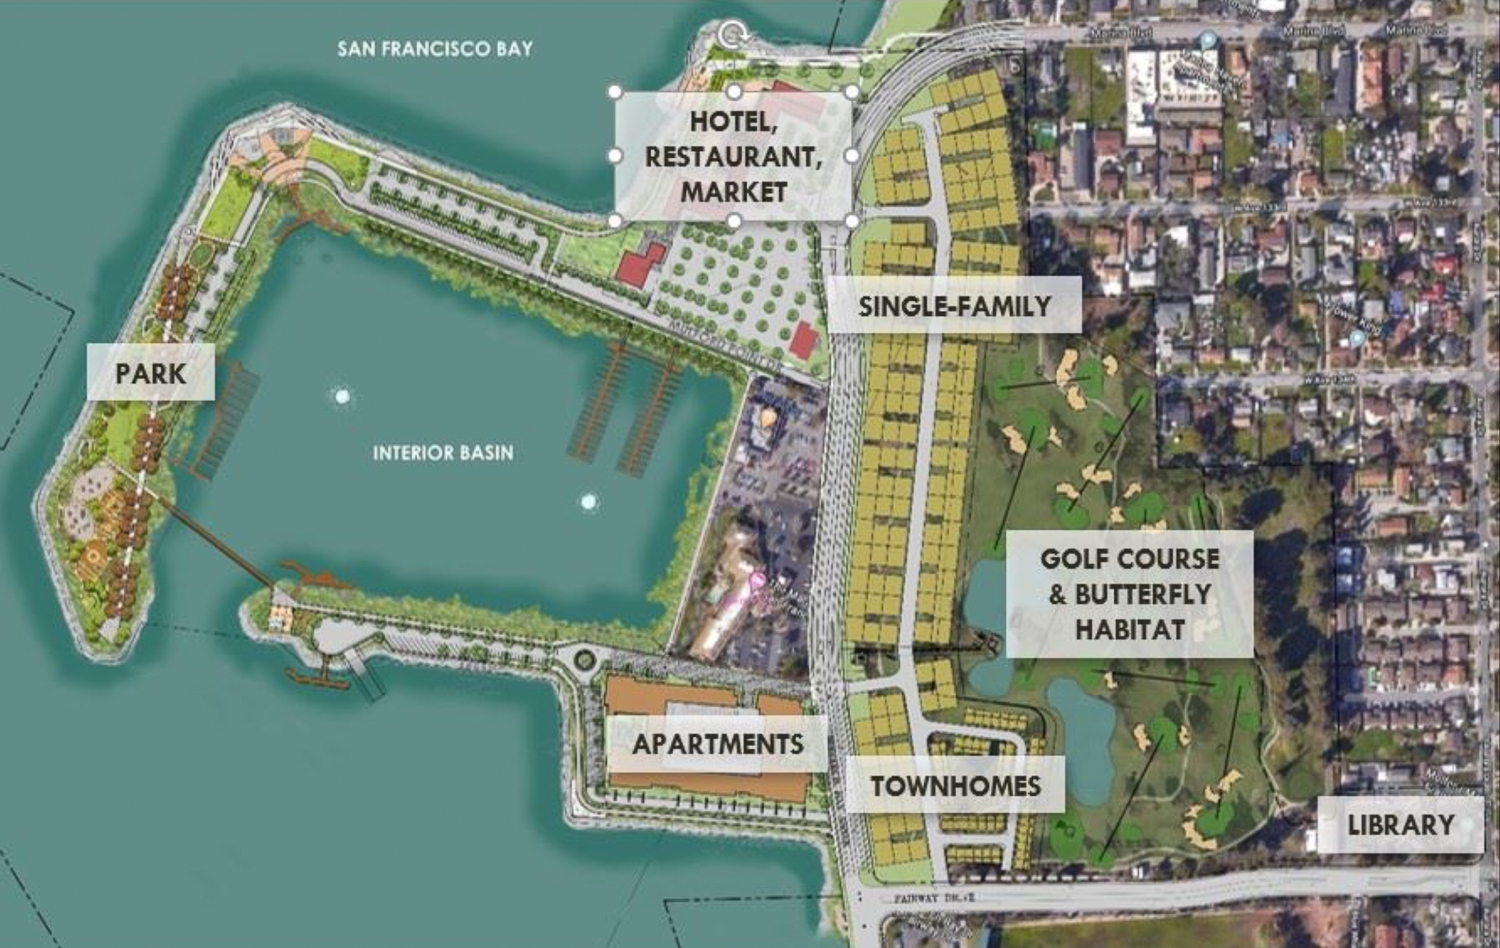 Monarch Bay development site map, image by the City of San Leandro